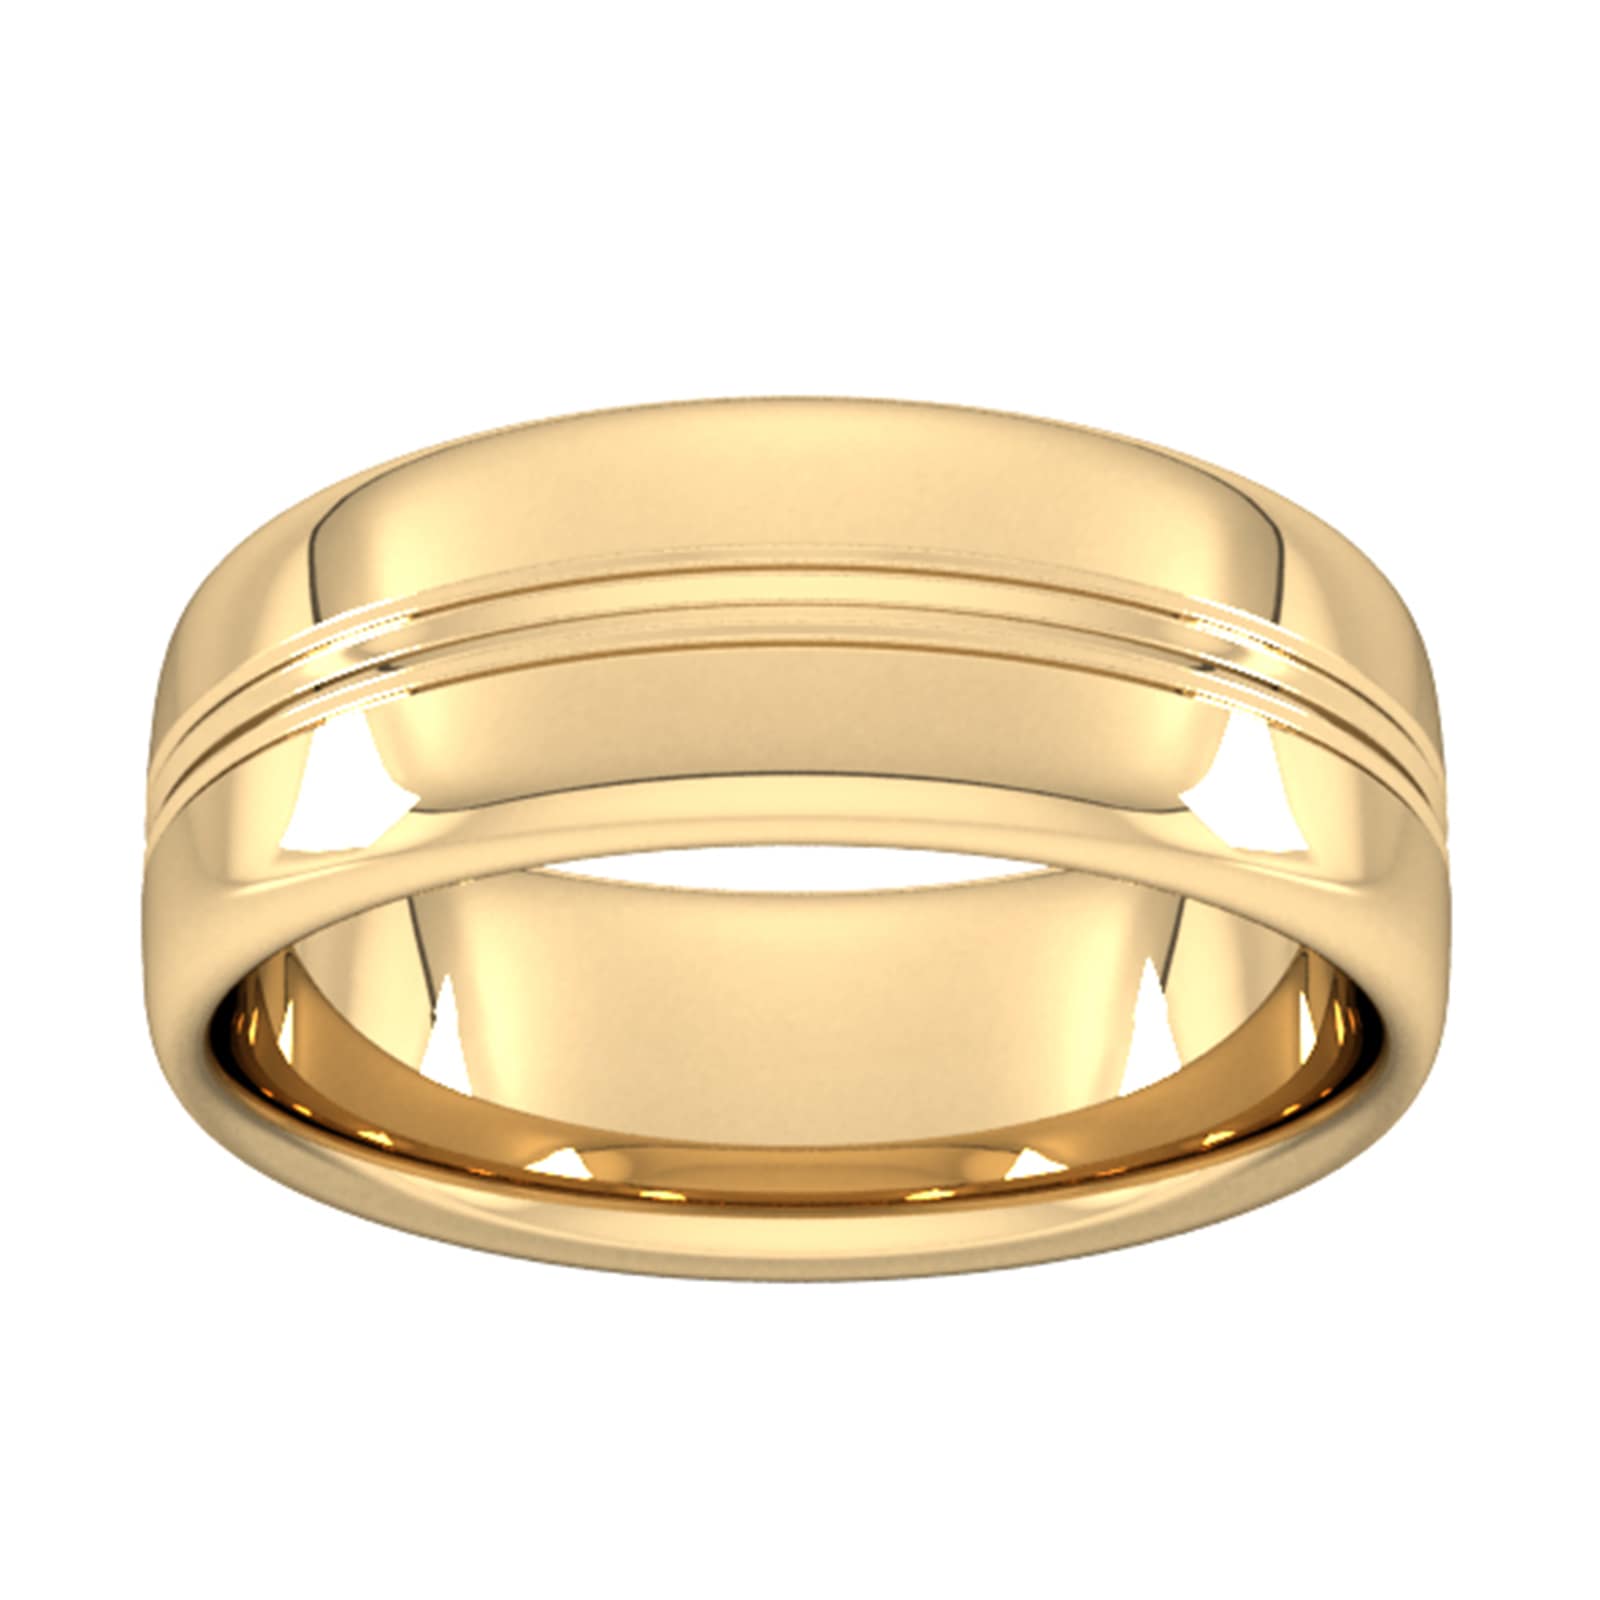 8mm Slight Court Extra Heavy Grooved Polished Finish Wedding Ring In 9 Carat Yellow Gold - Ring Size S